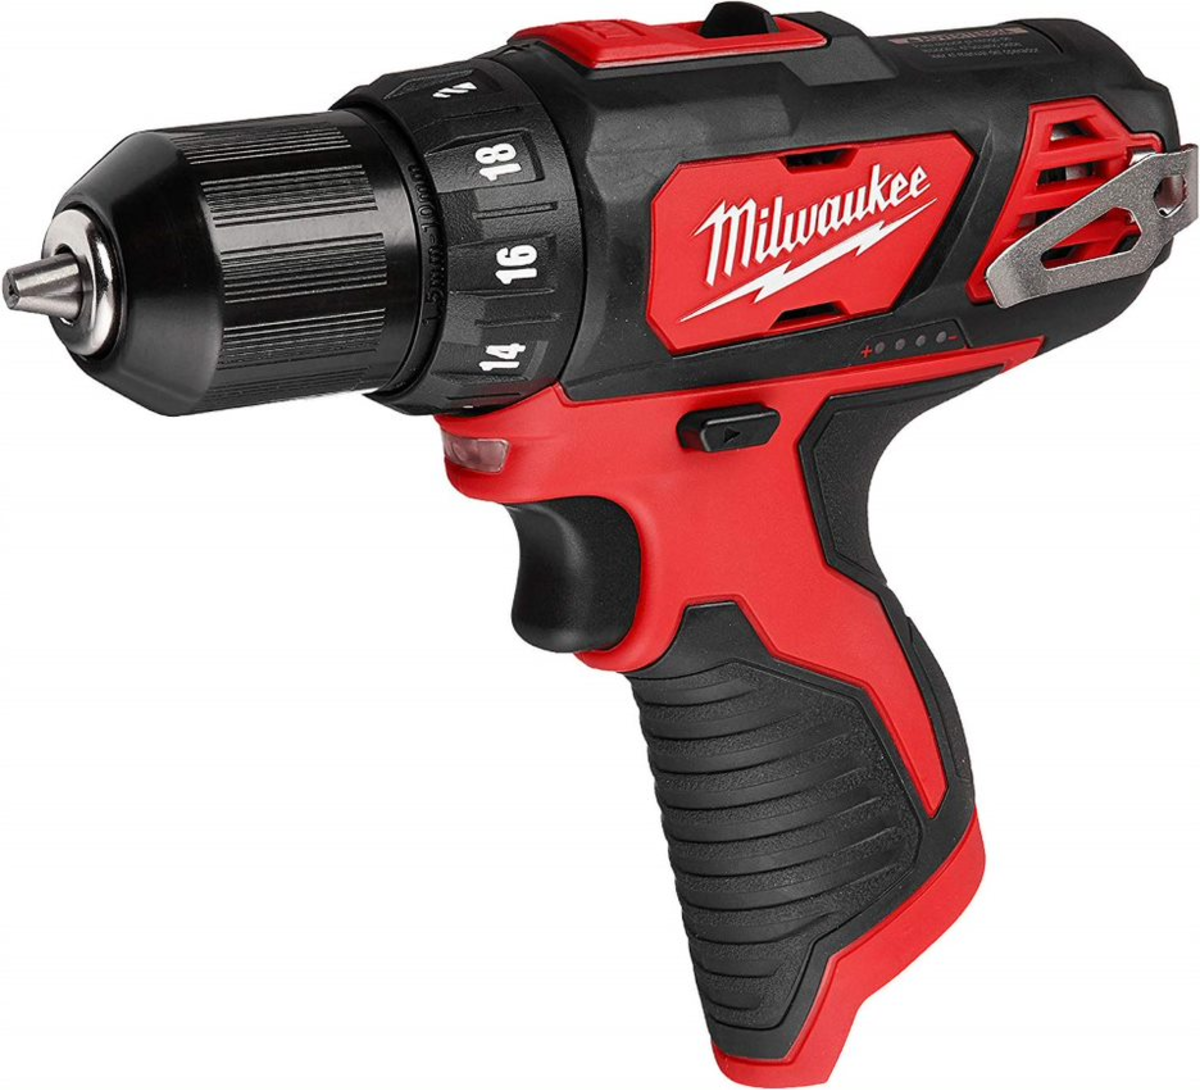 red and black 12V drill